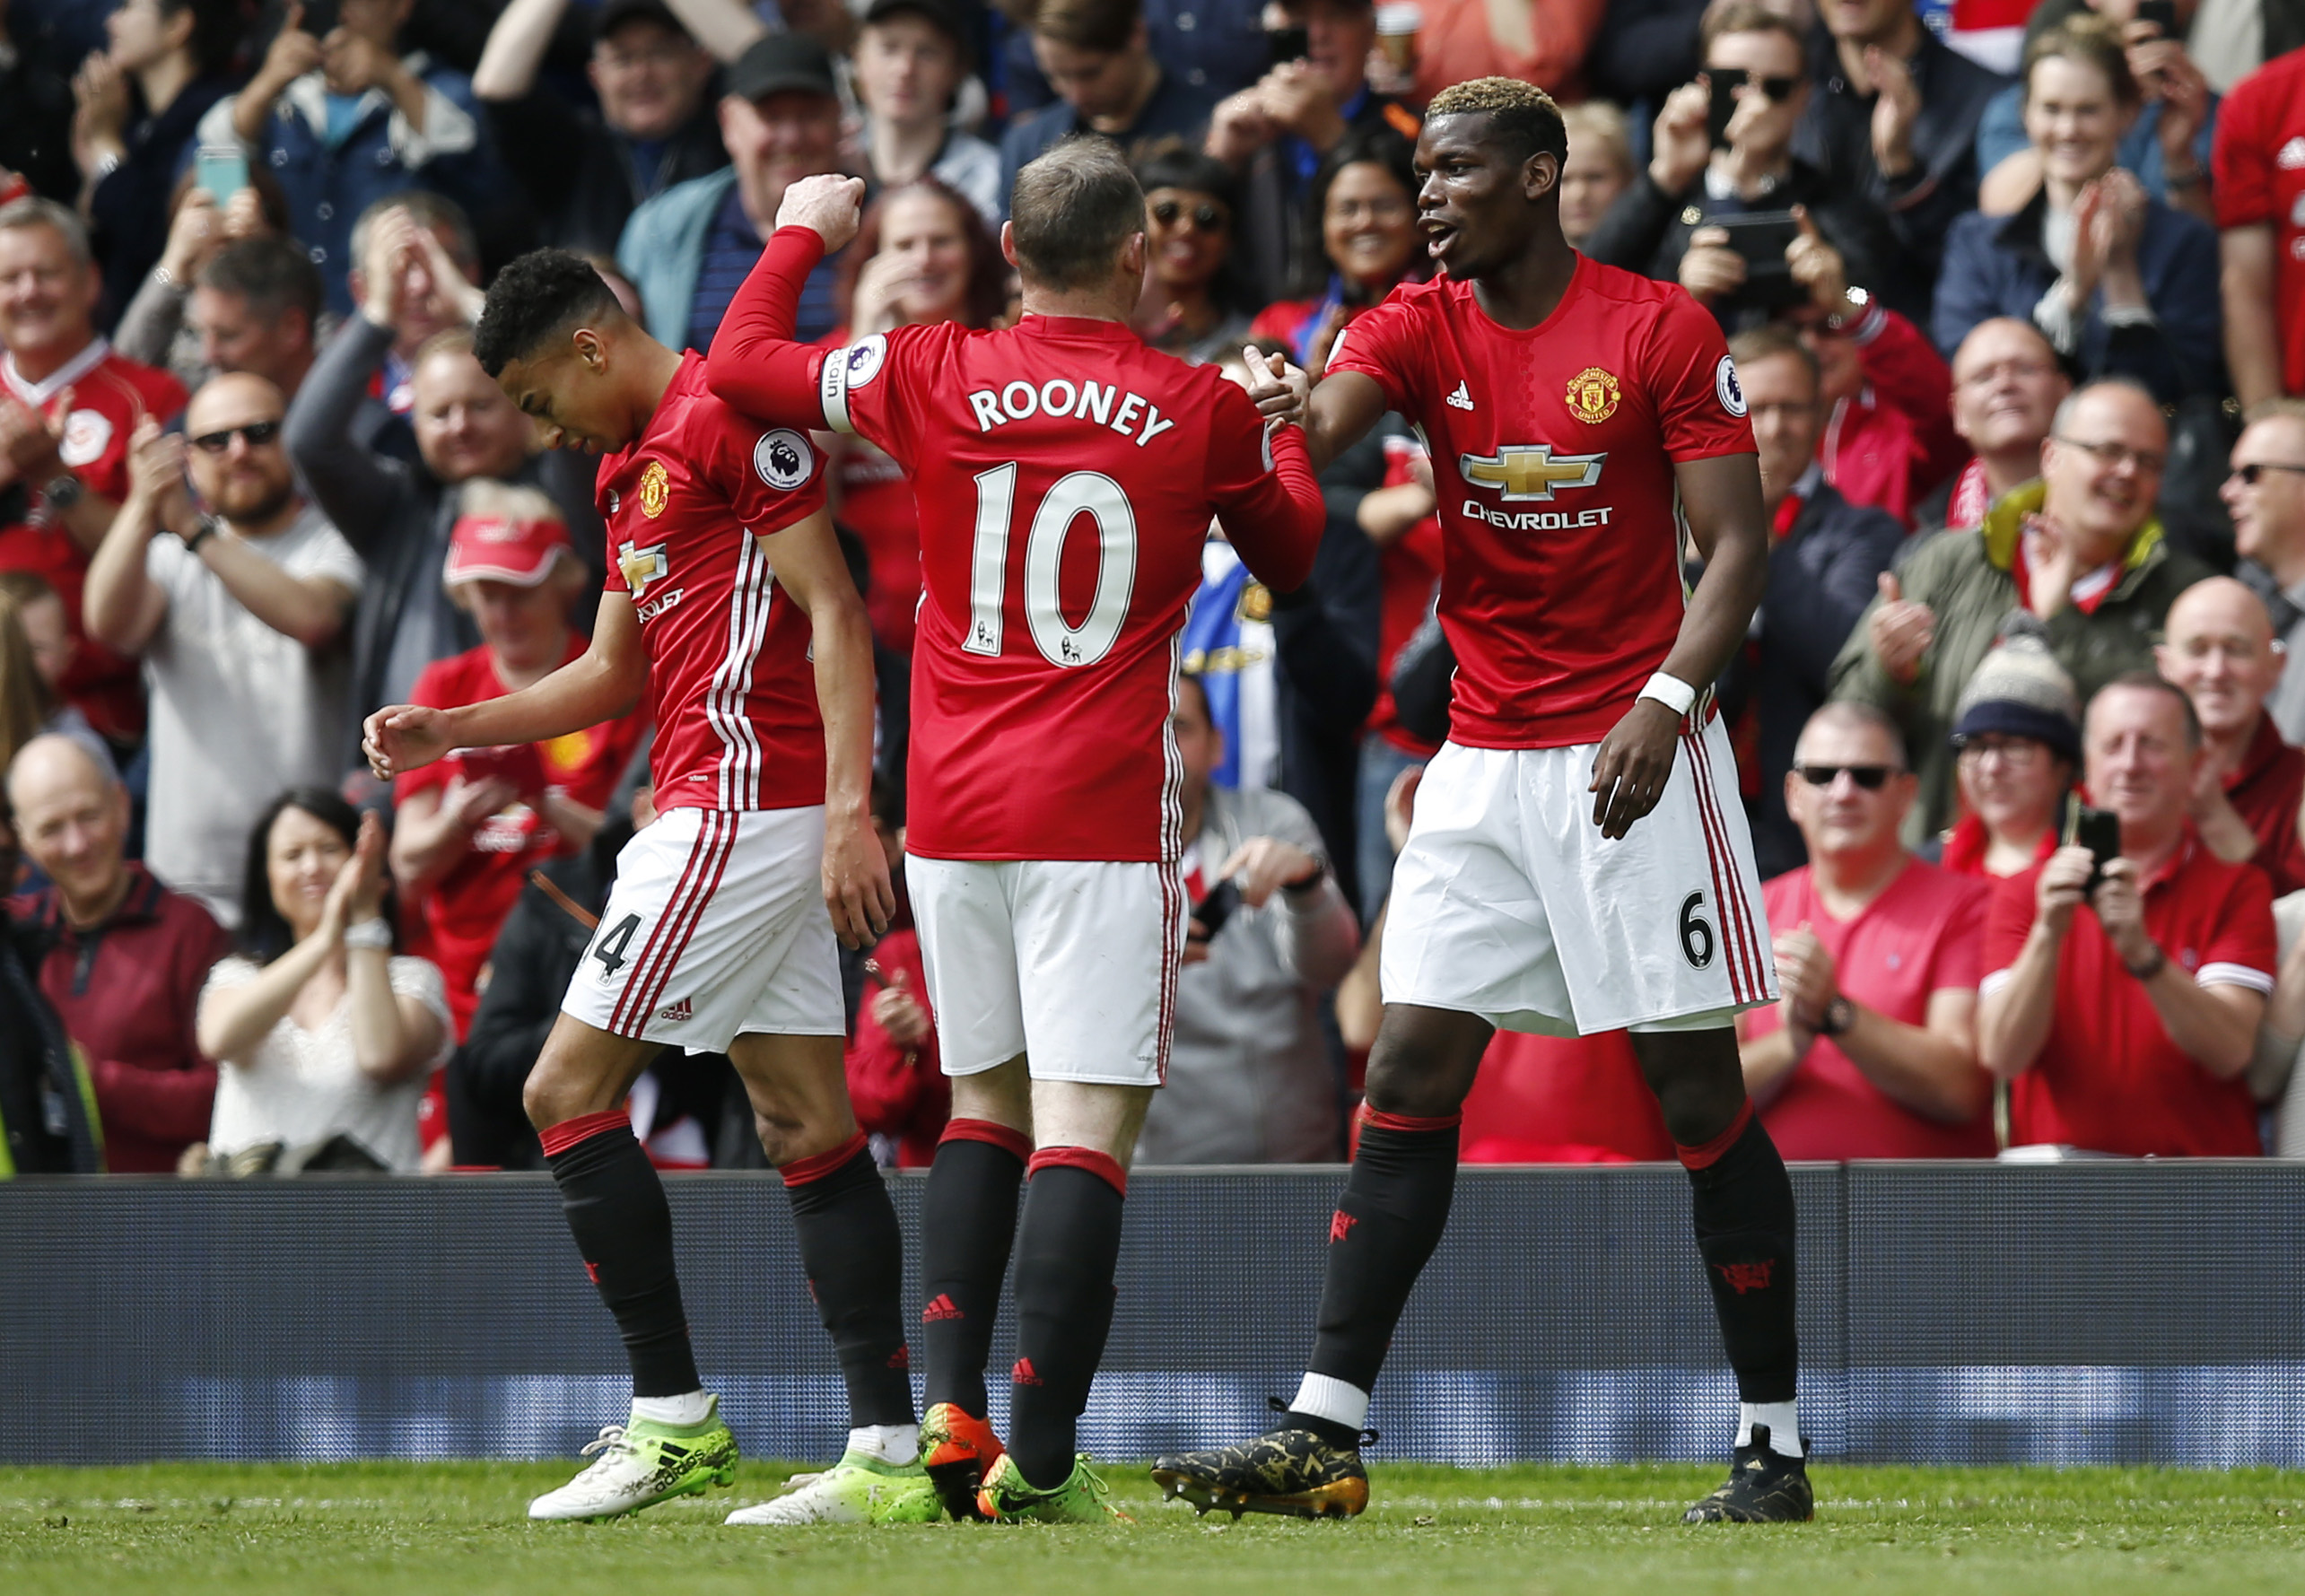 Football: Classy Pogba inspires Man United to win over Crystal Palace